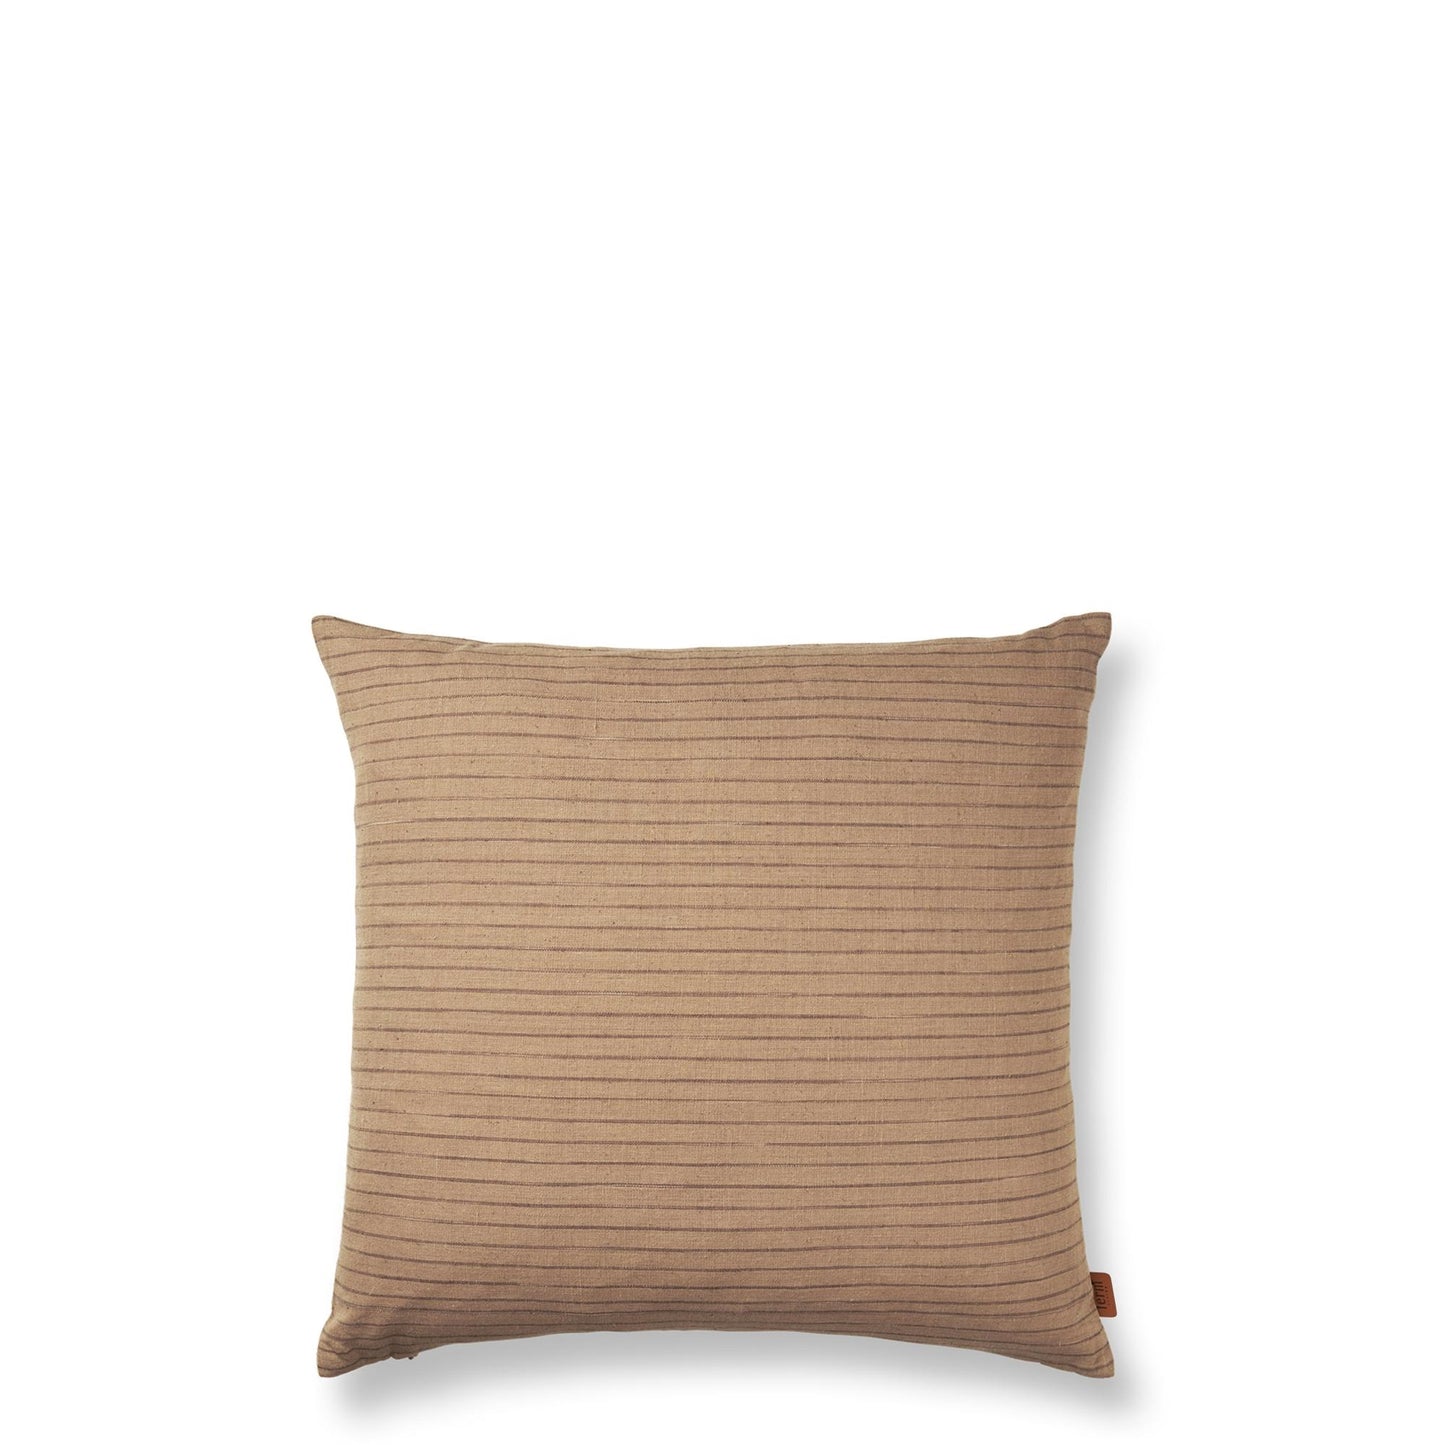 Brown Cotton Pillow by Ferm Living #Lines